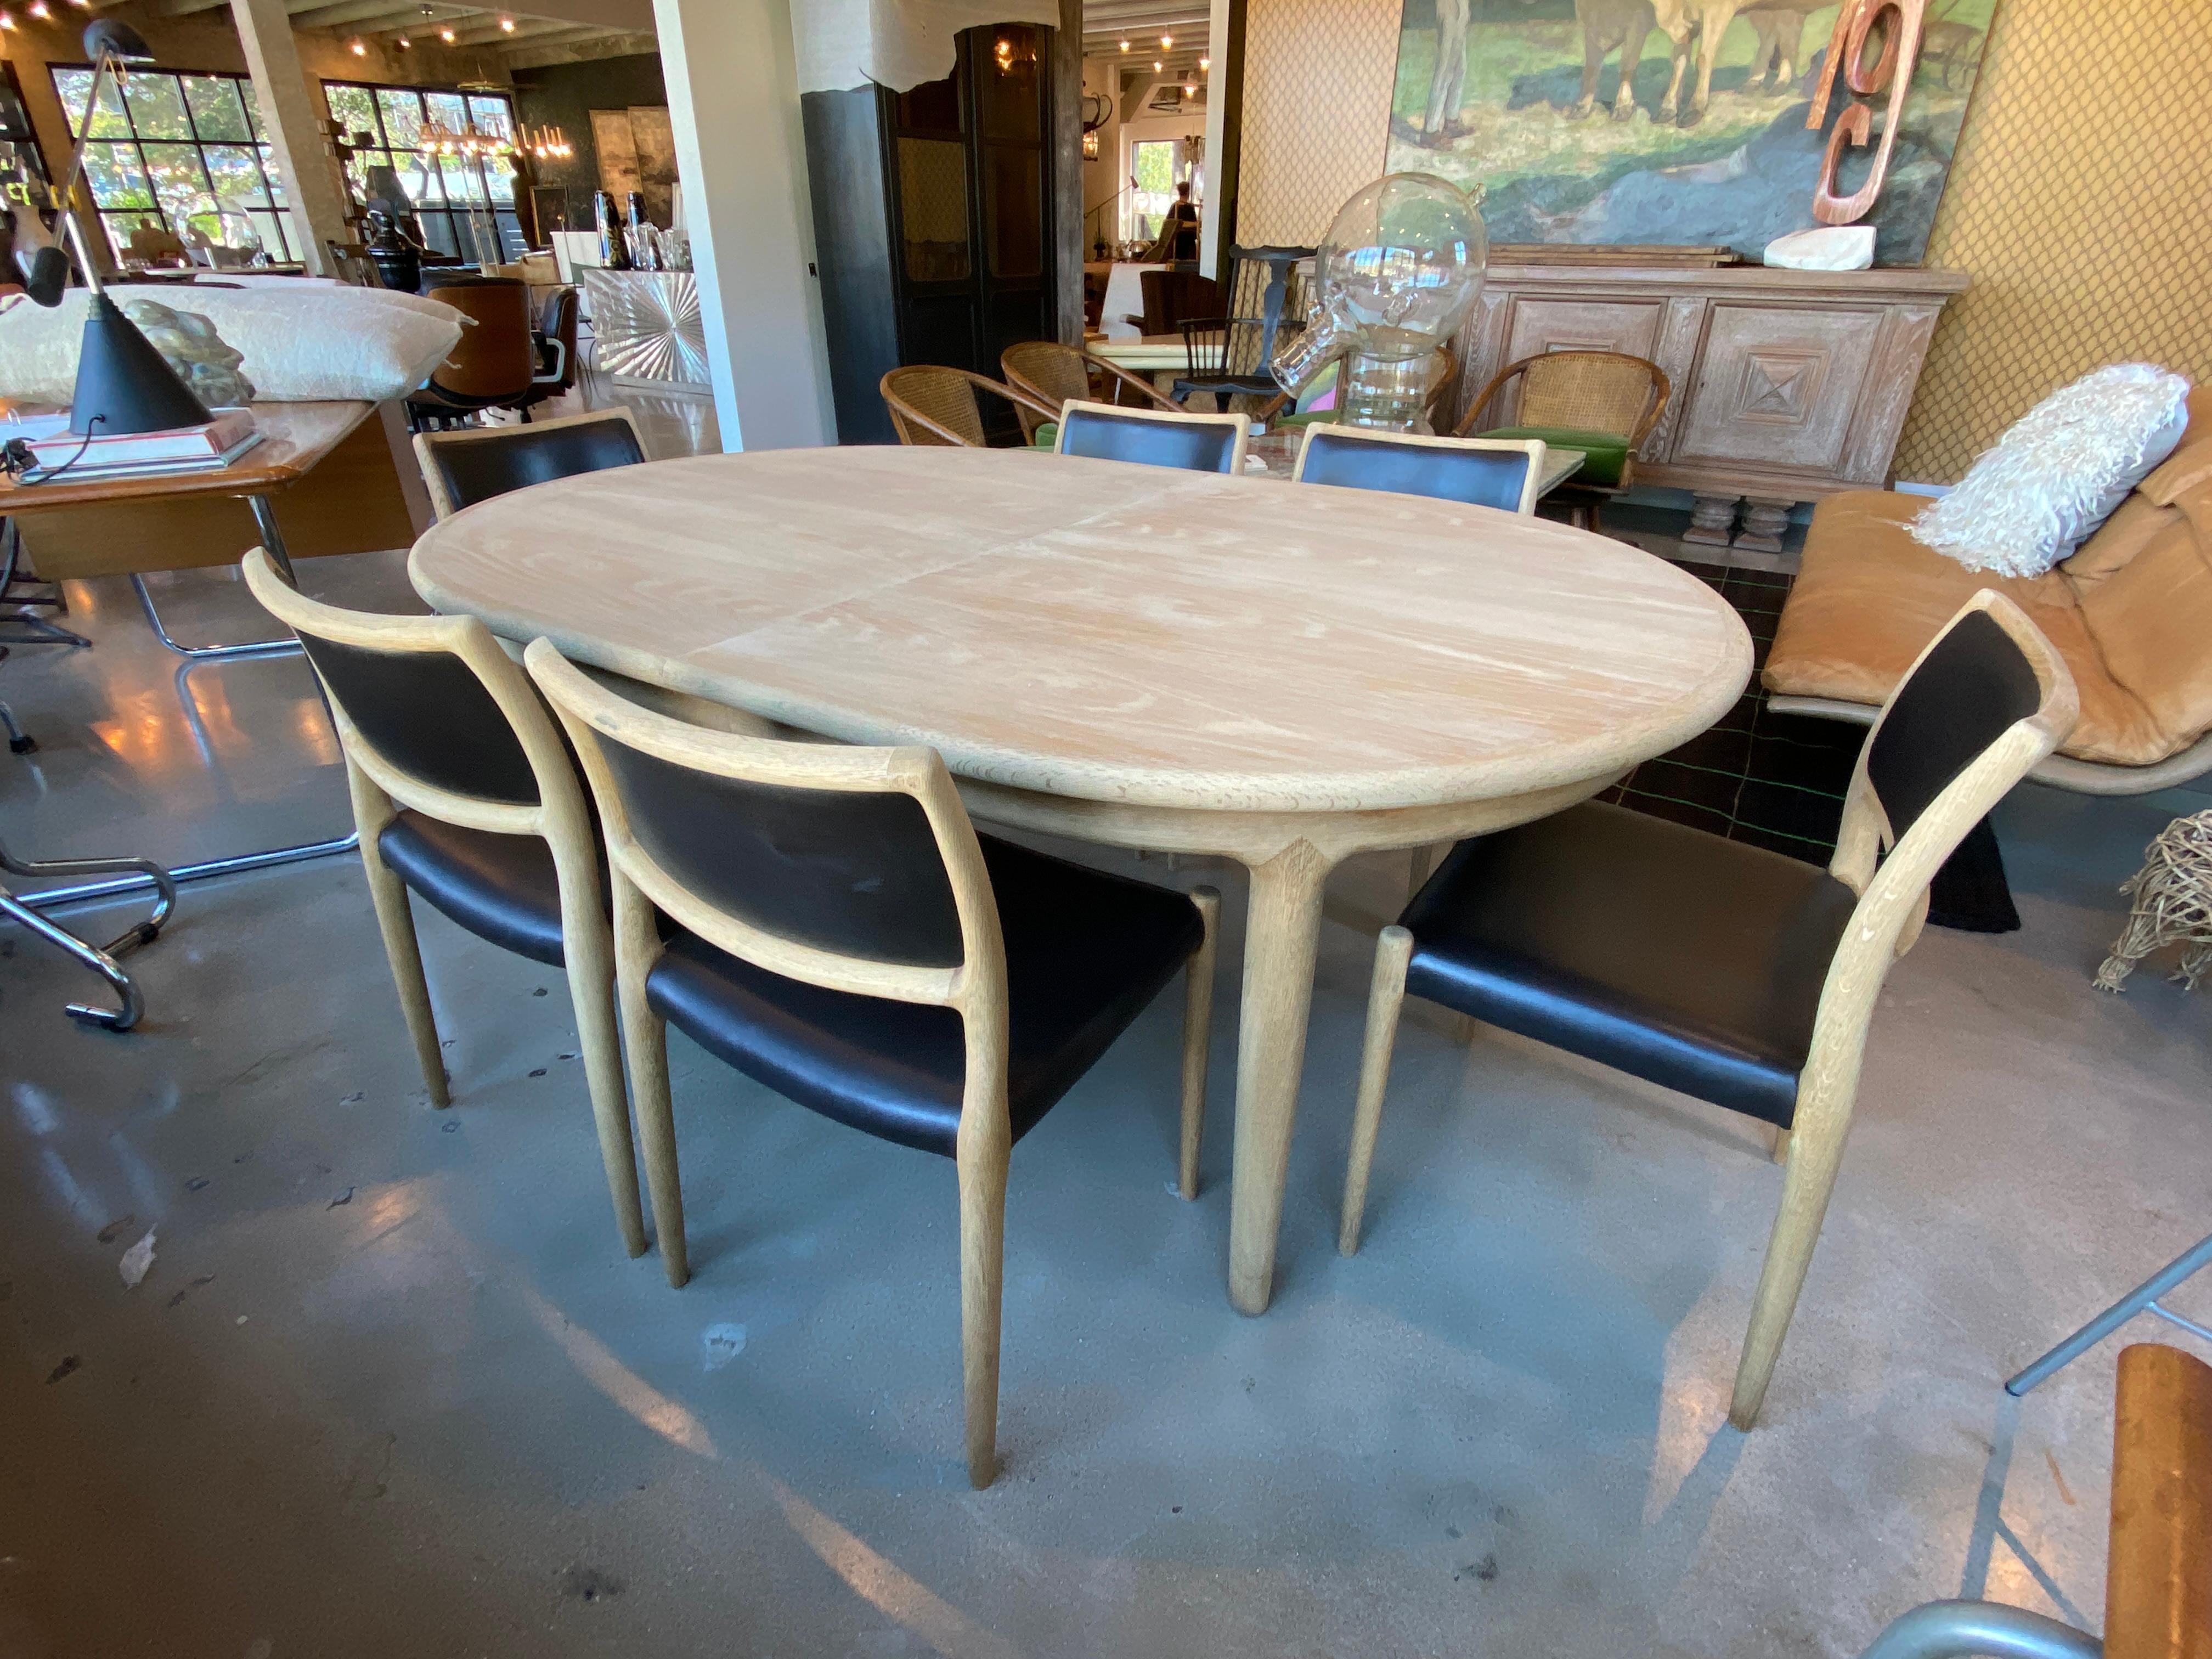 Niels Otto Møller for J.L. Møllers Møbelfabrik Model 80 dining set. Danish 1960s Mid-Century Modern design includes oval dining table and 6 comfortable side chairs. The dining table has built-in leaves that remain within the apron cavity when not in